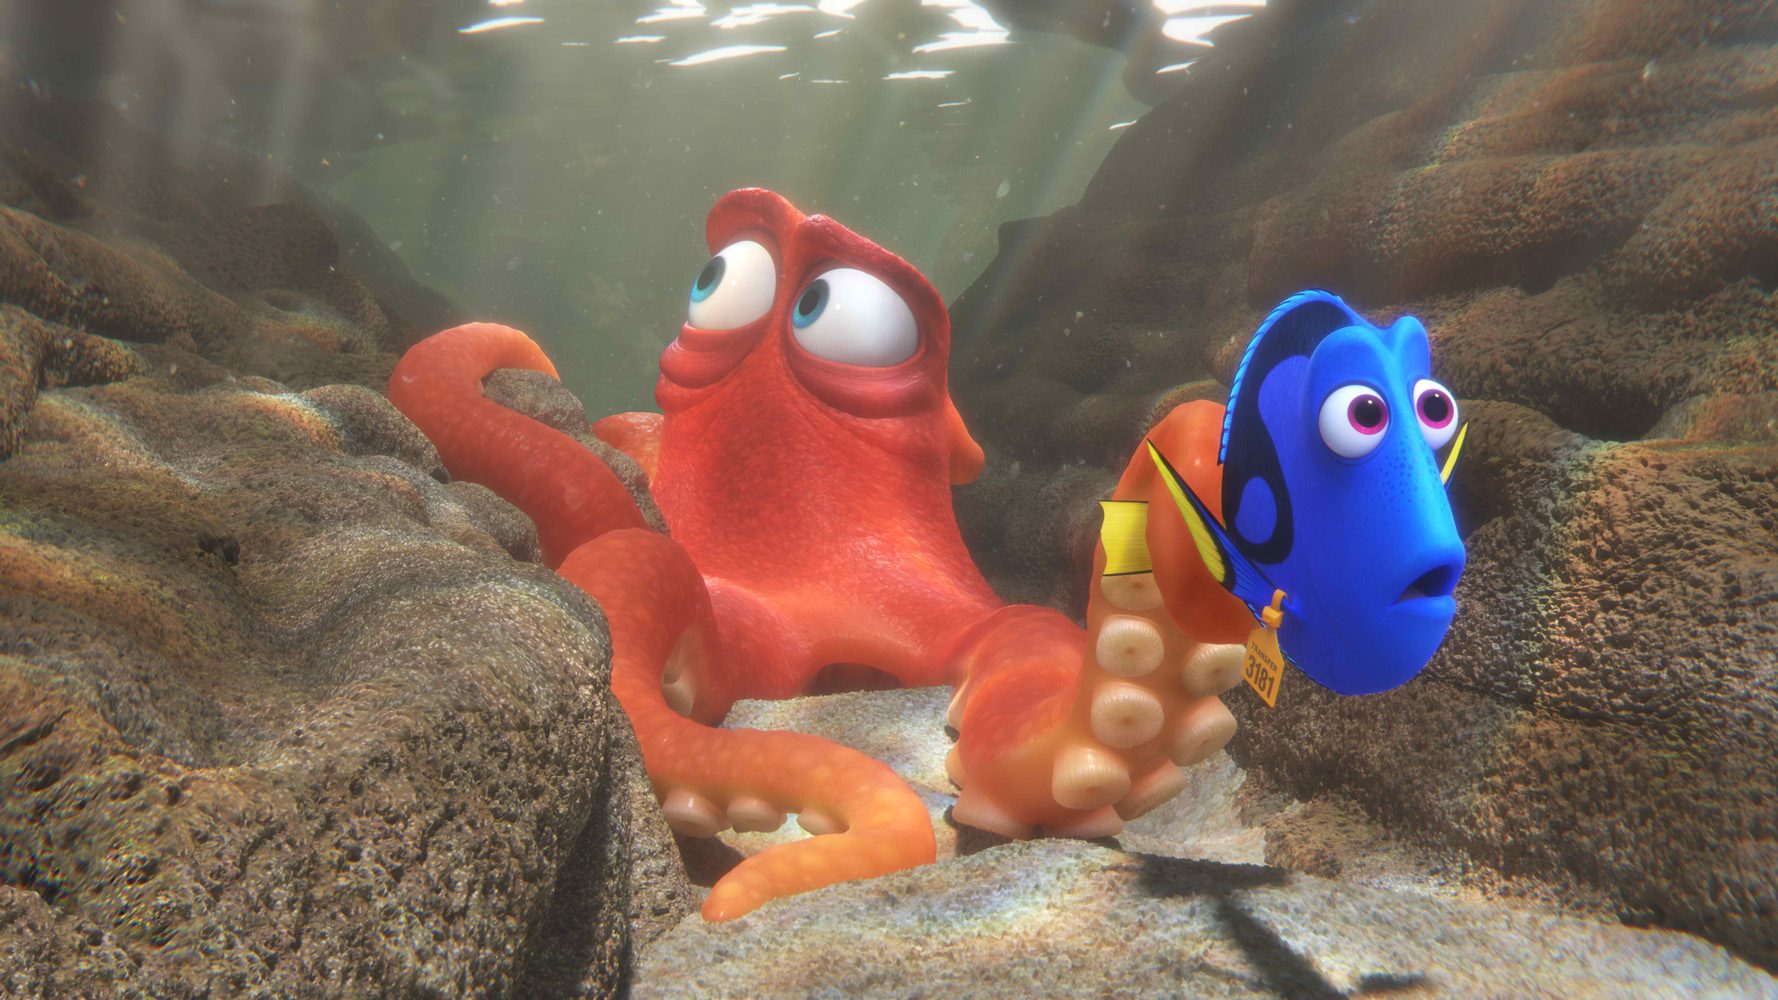 TOUCH POOL. Paul Abadilla says his favorite scene in 'Finding Dory' is the one where Hank and Dory race through a touch pool, because he worked on a lot of its environments. Photo courtesy of Disney-Pixar  